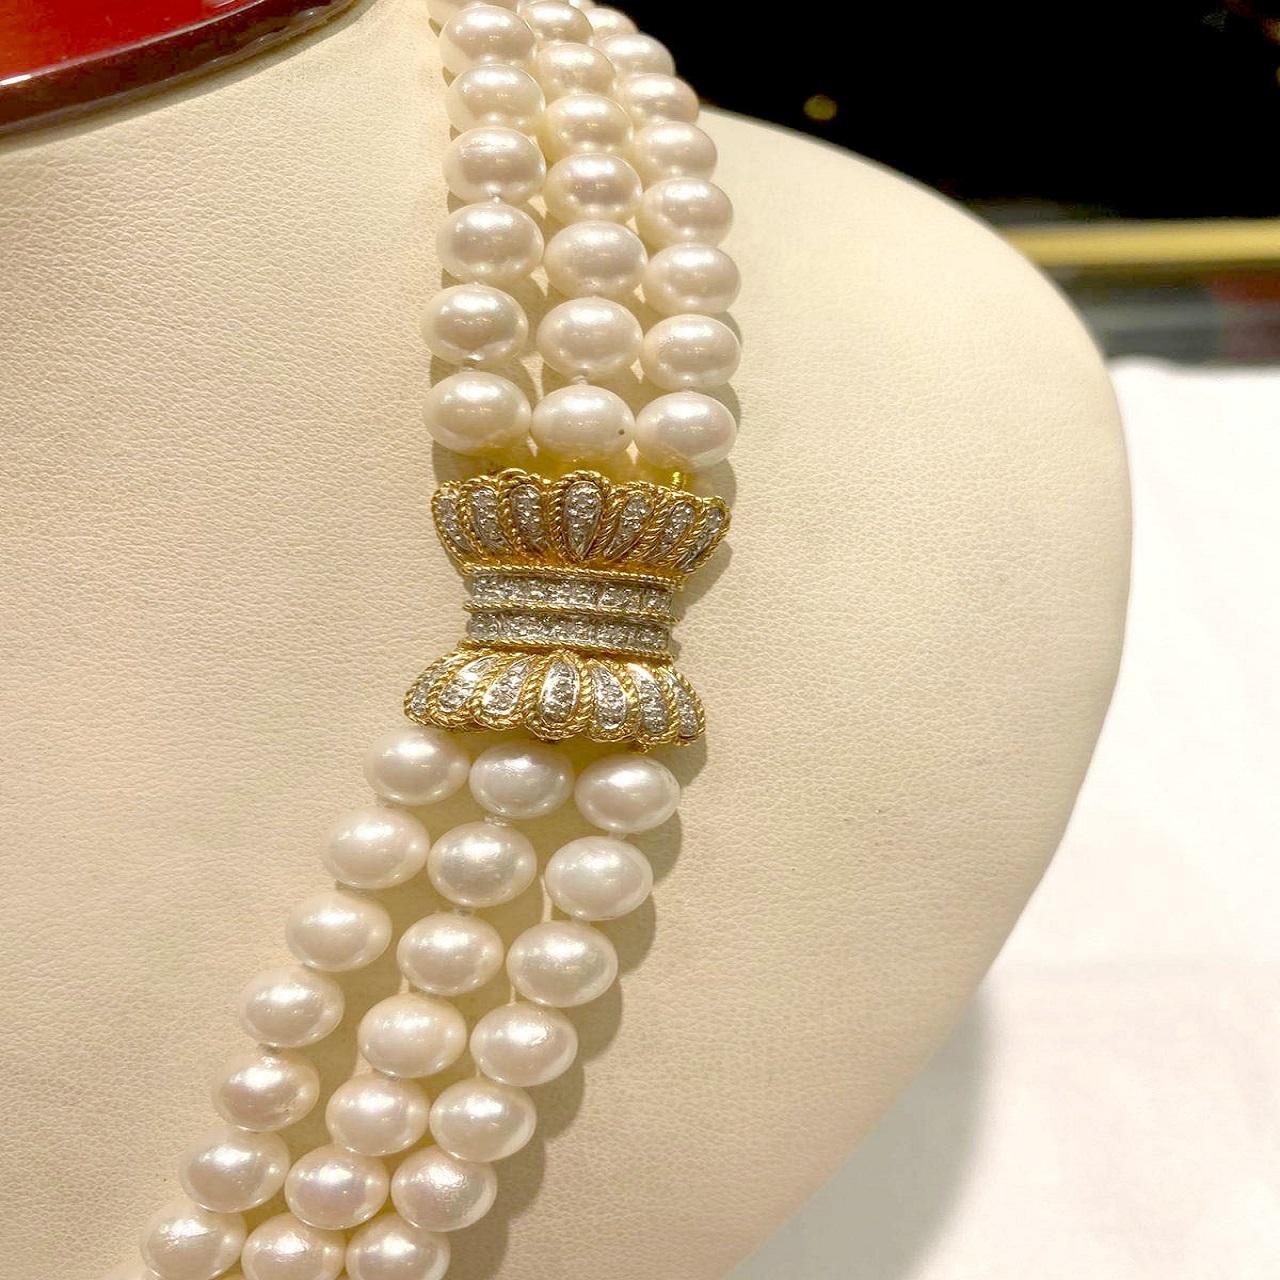 Round Cut Akoya Japanese Pearls with a 14k Gold Clasp with Diamonds